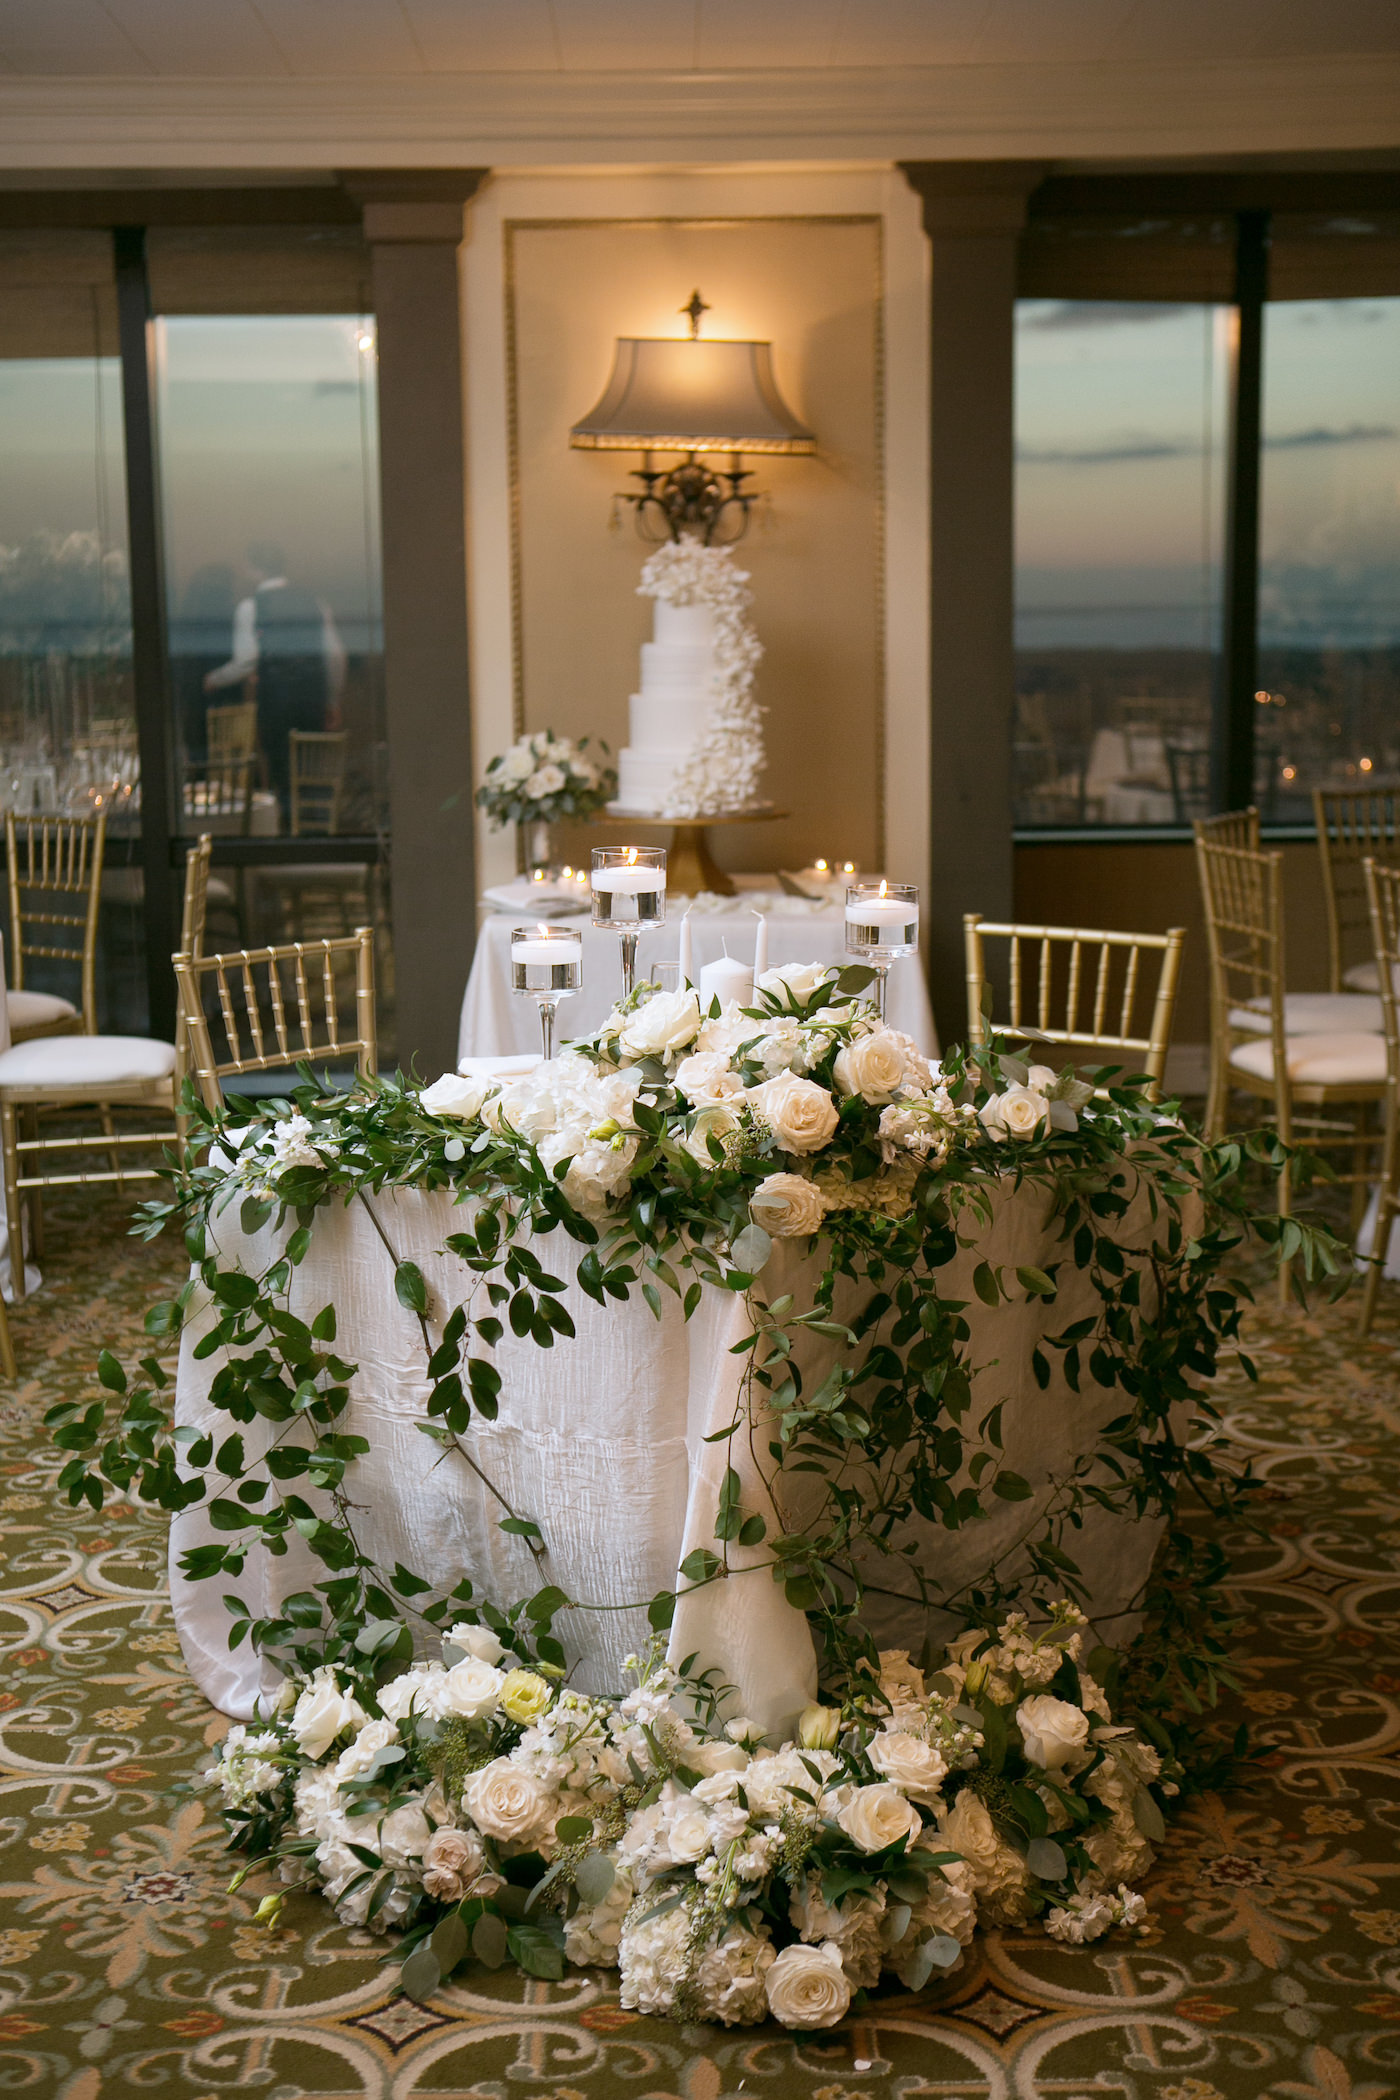 Classic Timeless Wedding Reception Decor, Sweetheart Table with White Linen, Whimsical Greenery Leaves and Vines with White Roses, Hydrangeas Florals, Tall Floating Candlesticks, Gold Chiavari Chairs | Wedding Photographer Carrie Wildes Photography | Ballroom Wedding Venue The Tampa Club